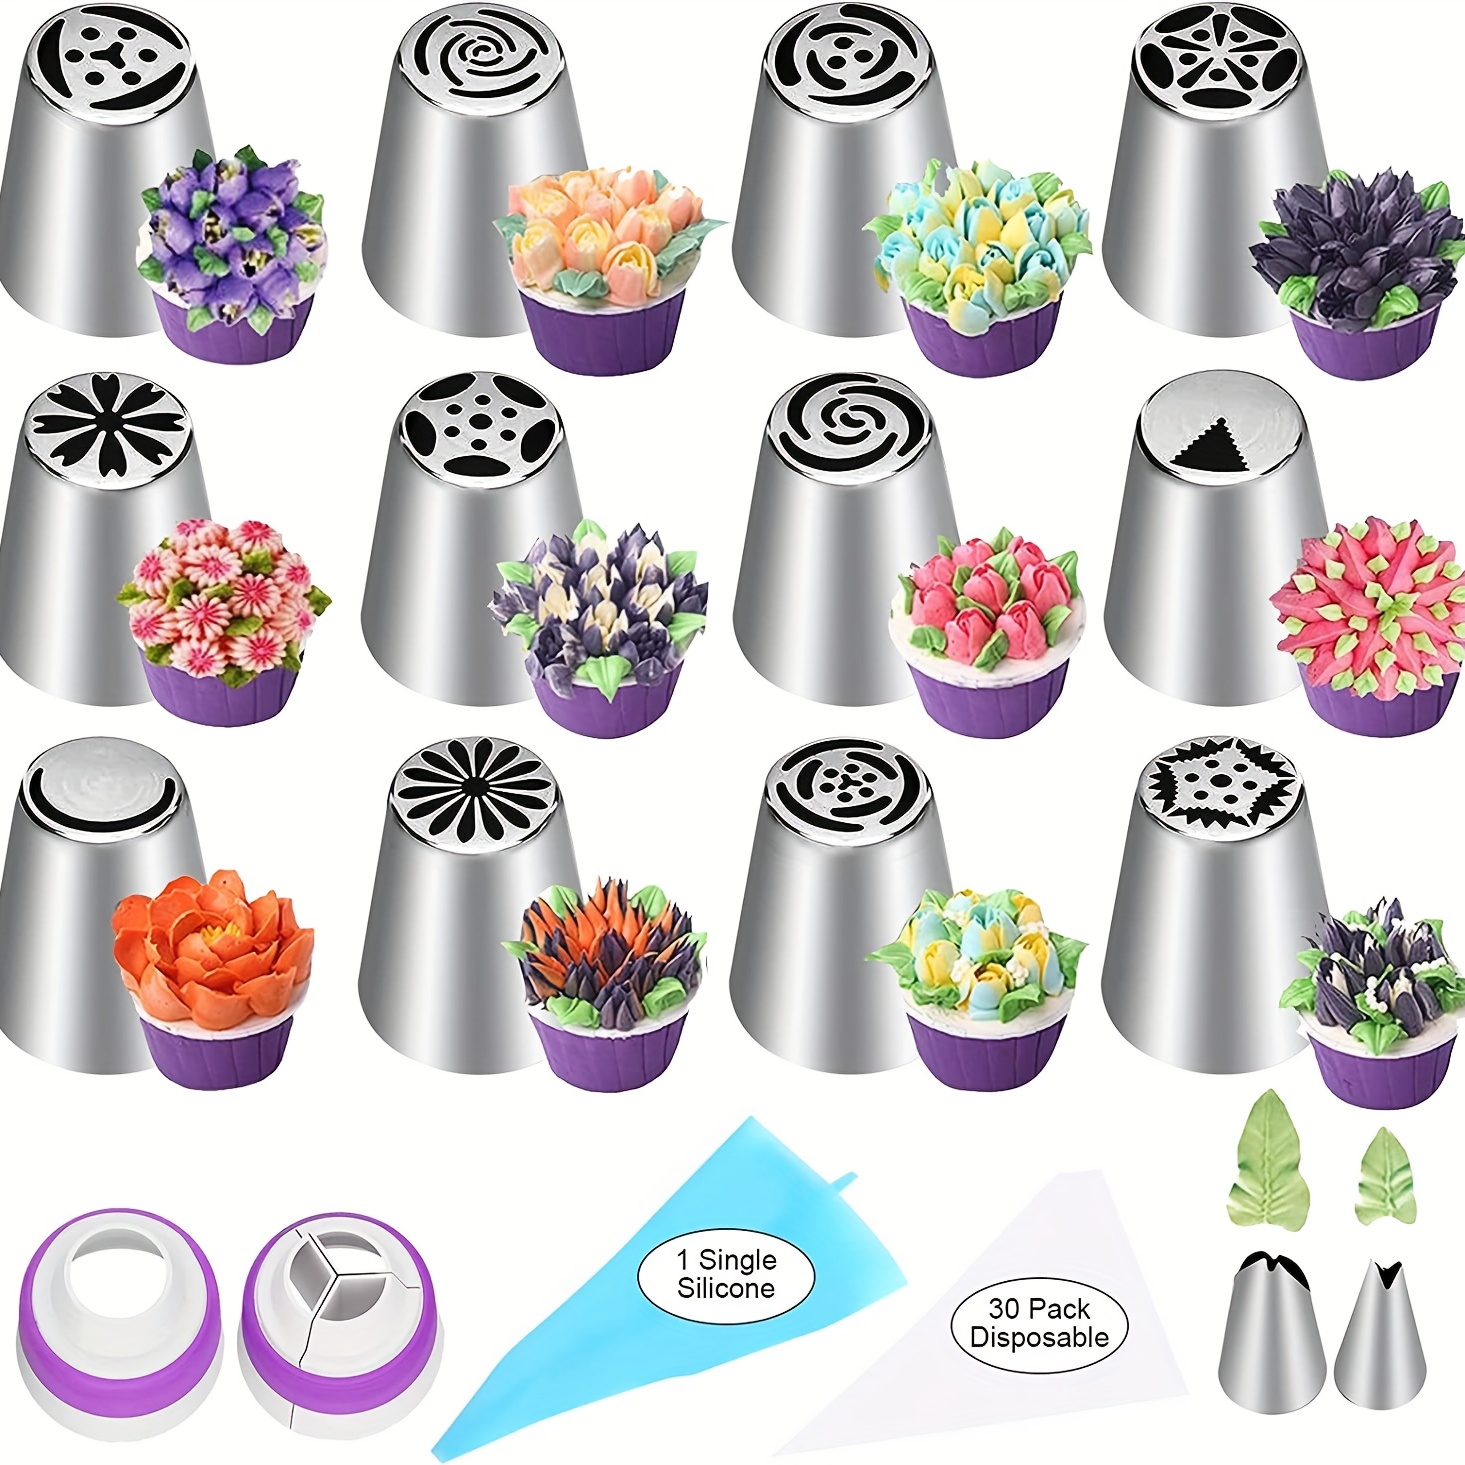 

47pcs Cake Decorating Set, Including 12 Flower Pastry Tips Nozzles Icing Tips, 2 Leaf Shape Piping Tips, 2 Couplers And 30 Pipping Bags, For Cake Decorating Tools, Baking Supplies For Cookie Cupcake